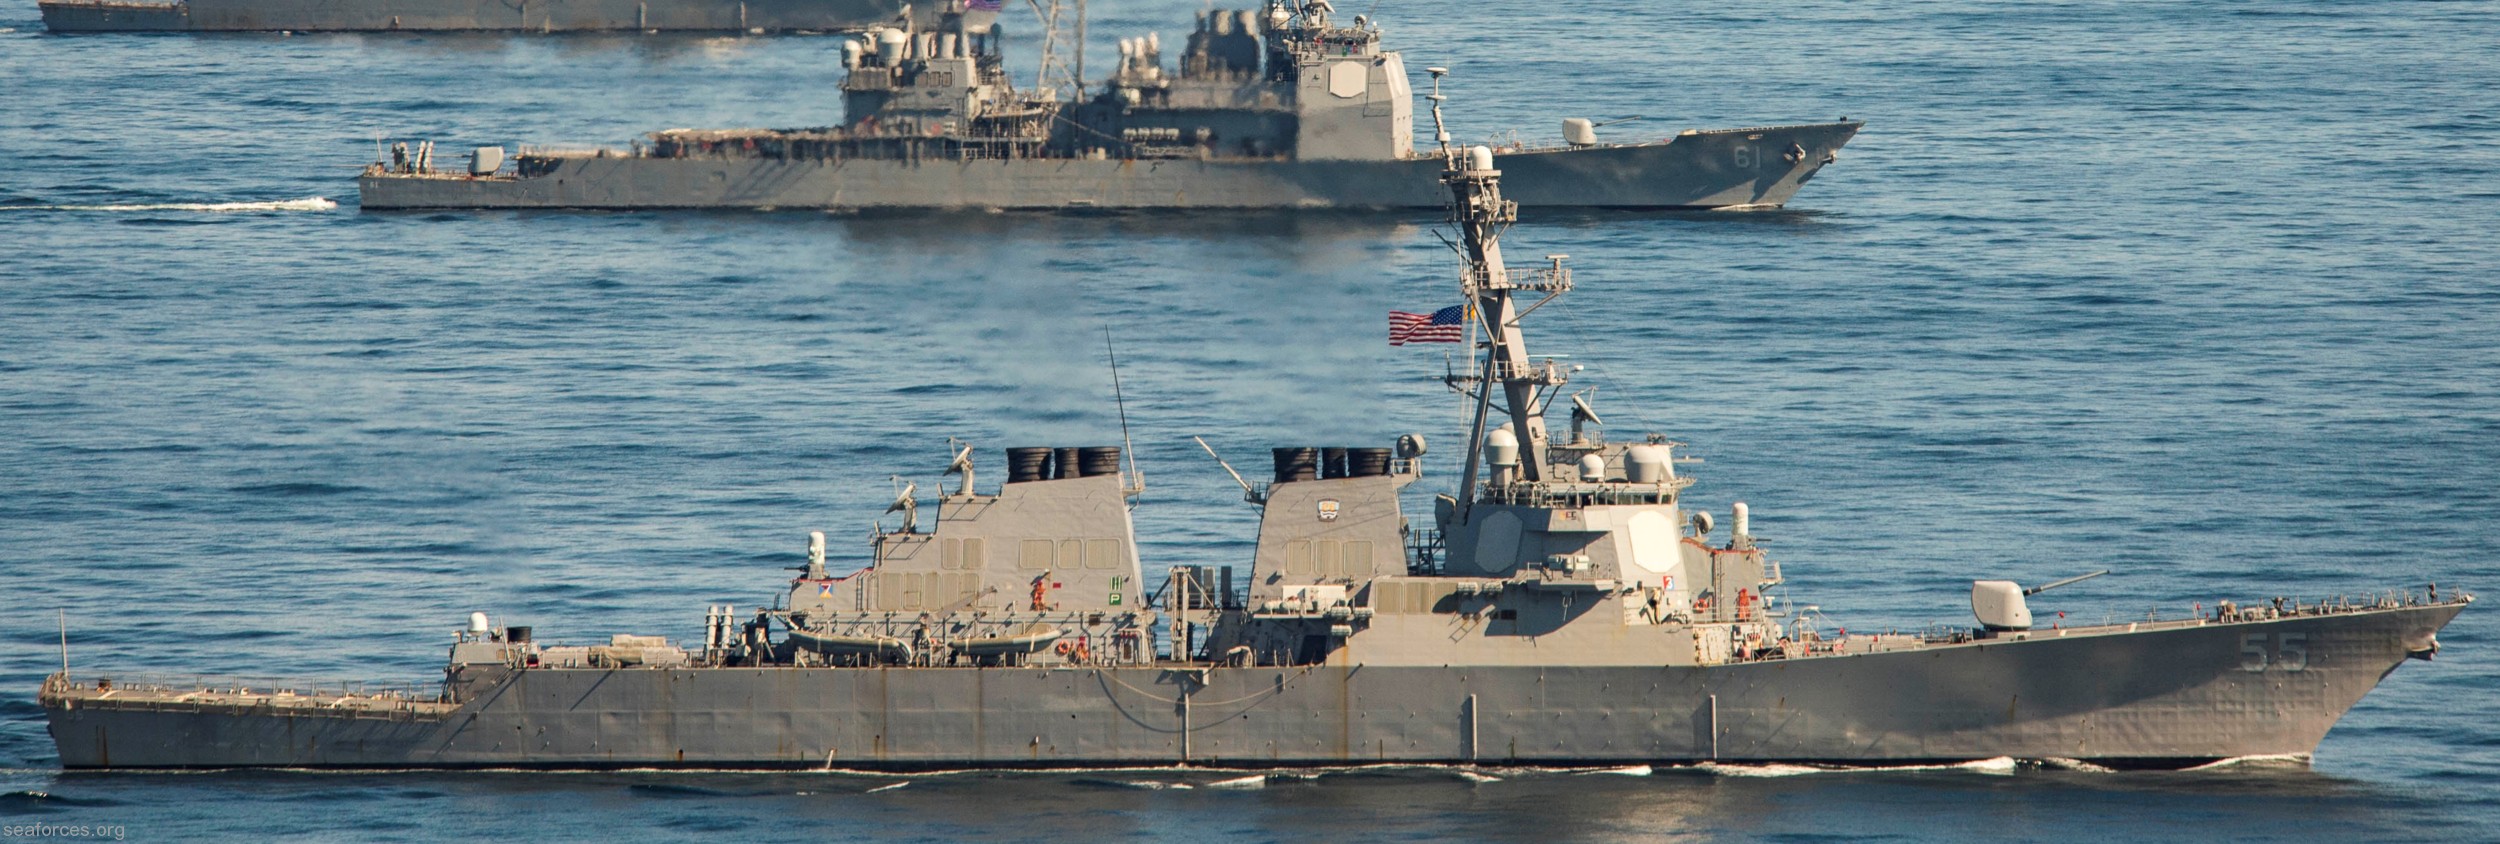 ddg-55 uss stout guided missile destroyer us navy 19